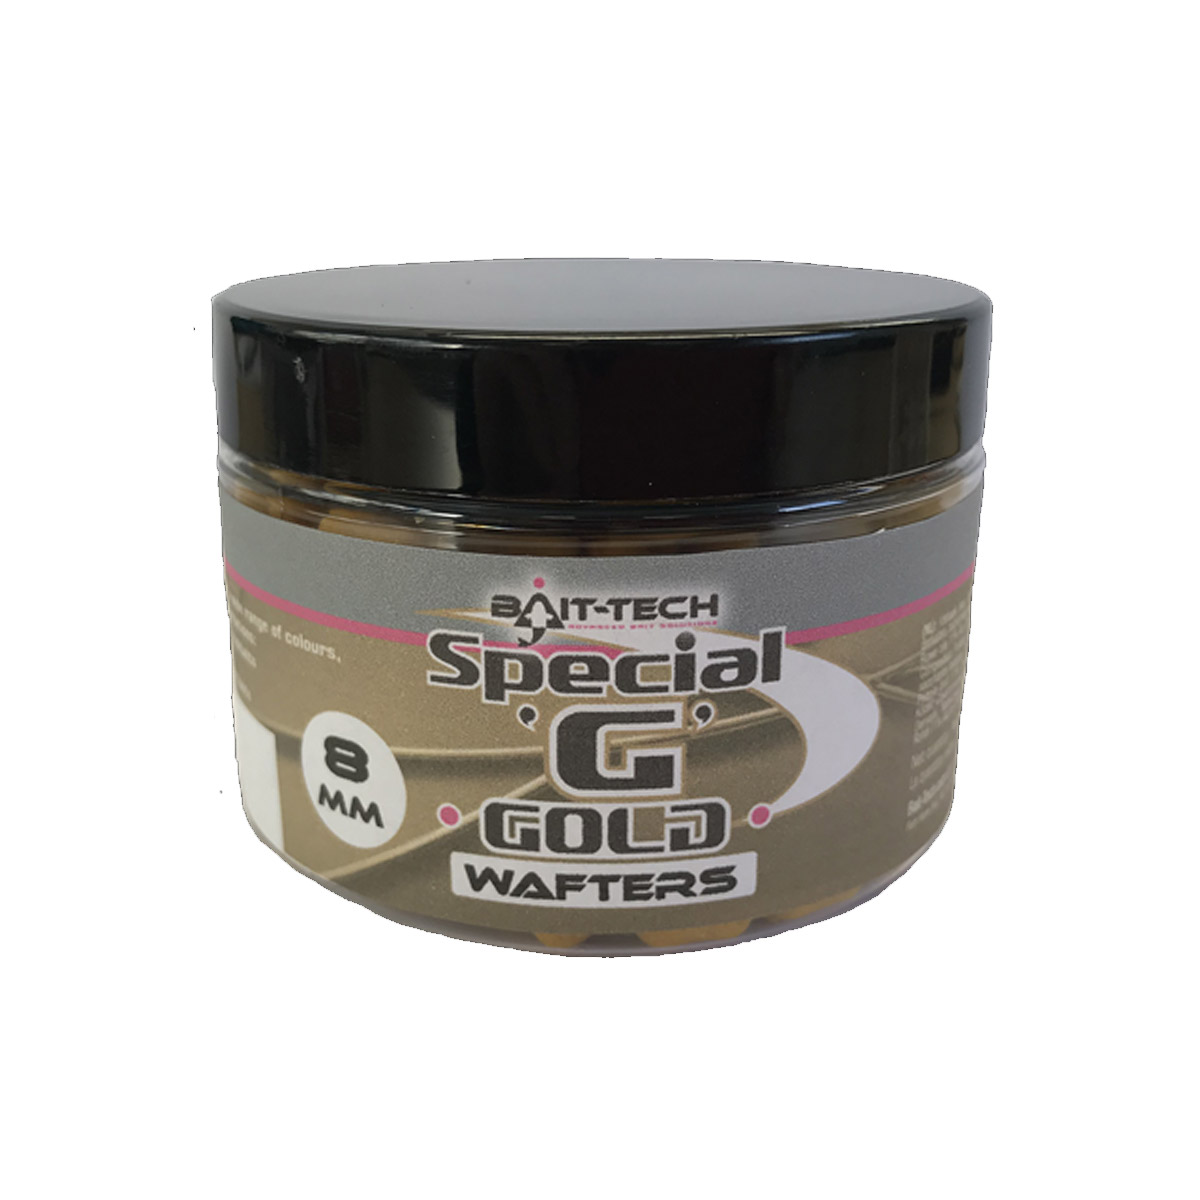 Bait-Tech Wafters Special G Gold Dumbells 8 MM